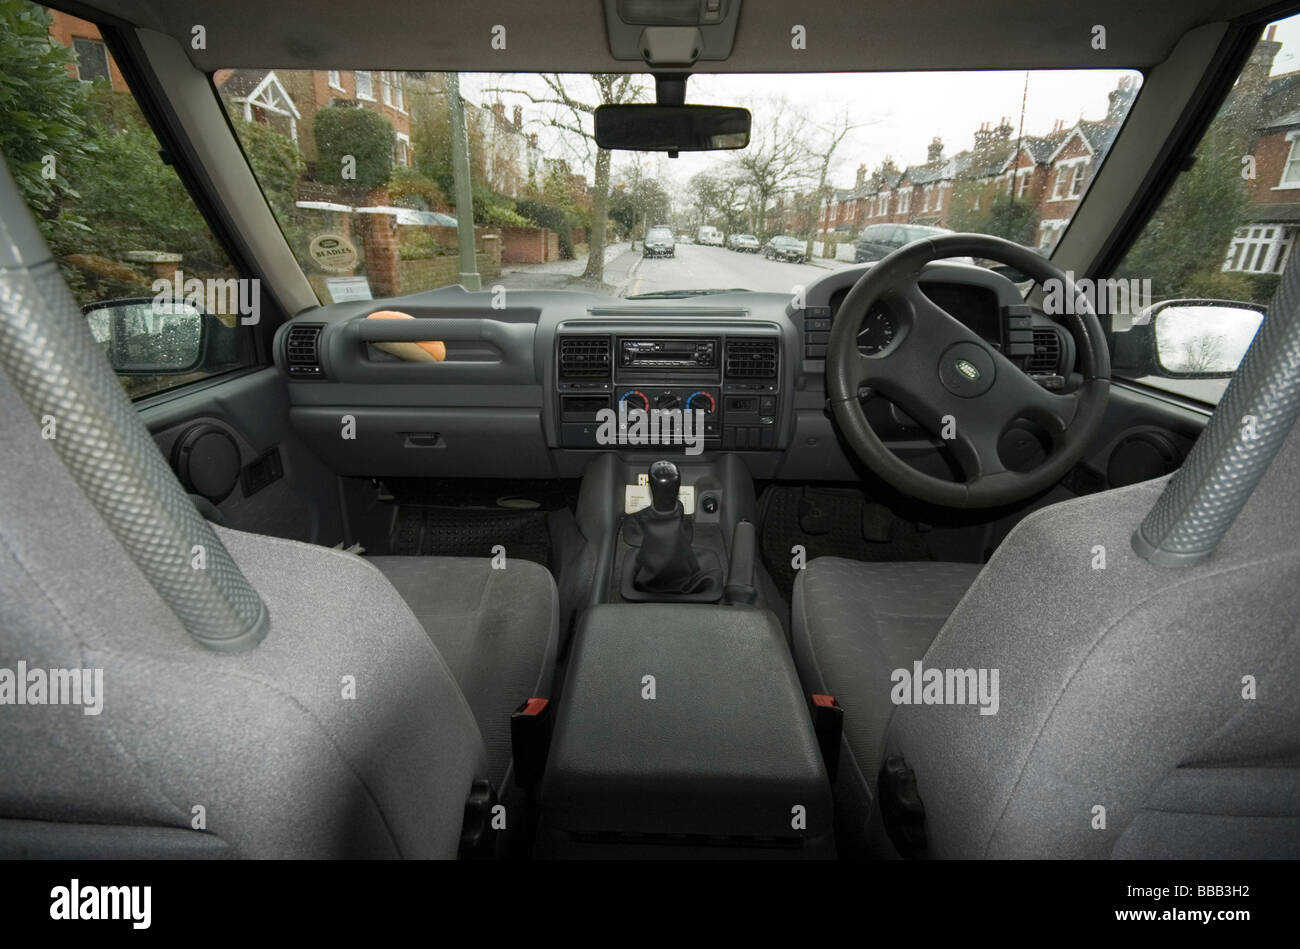 Dashboard of Land Rover Discovery and suburban street seen through windscreen. Stock Photo